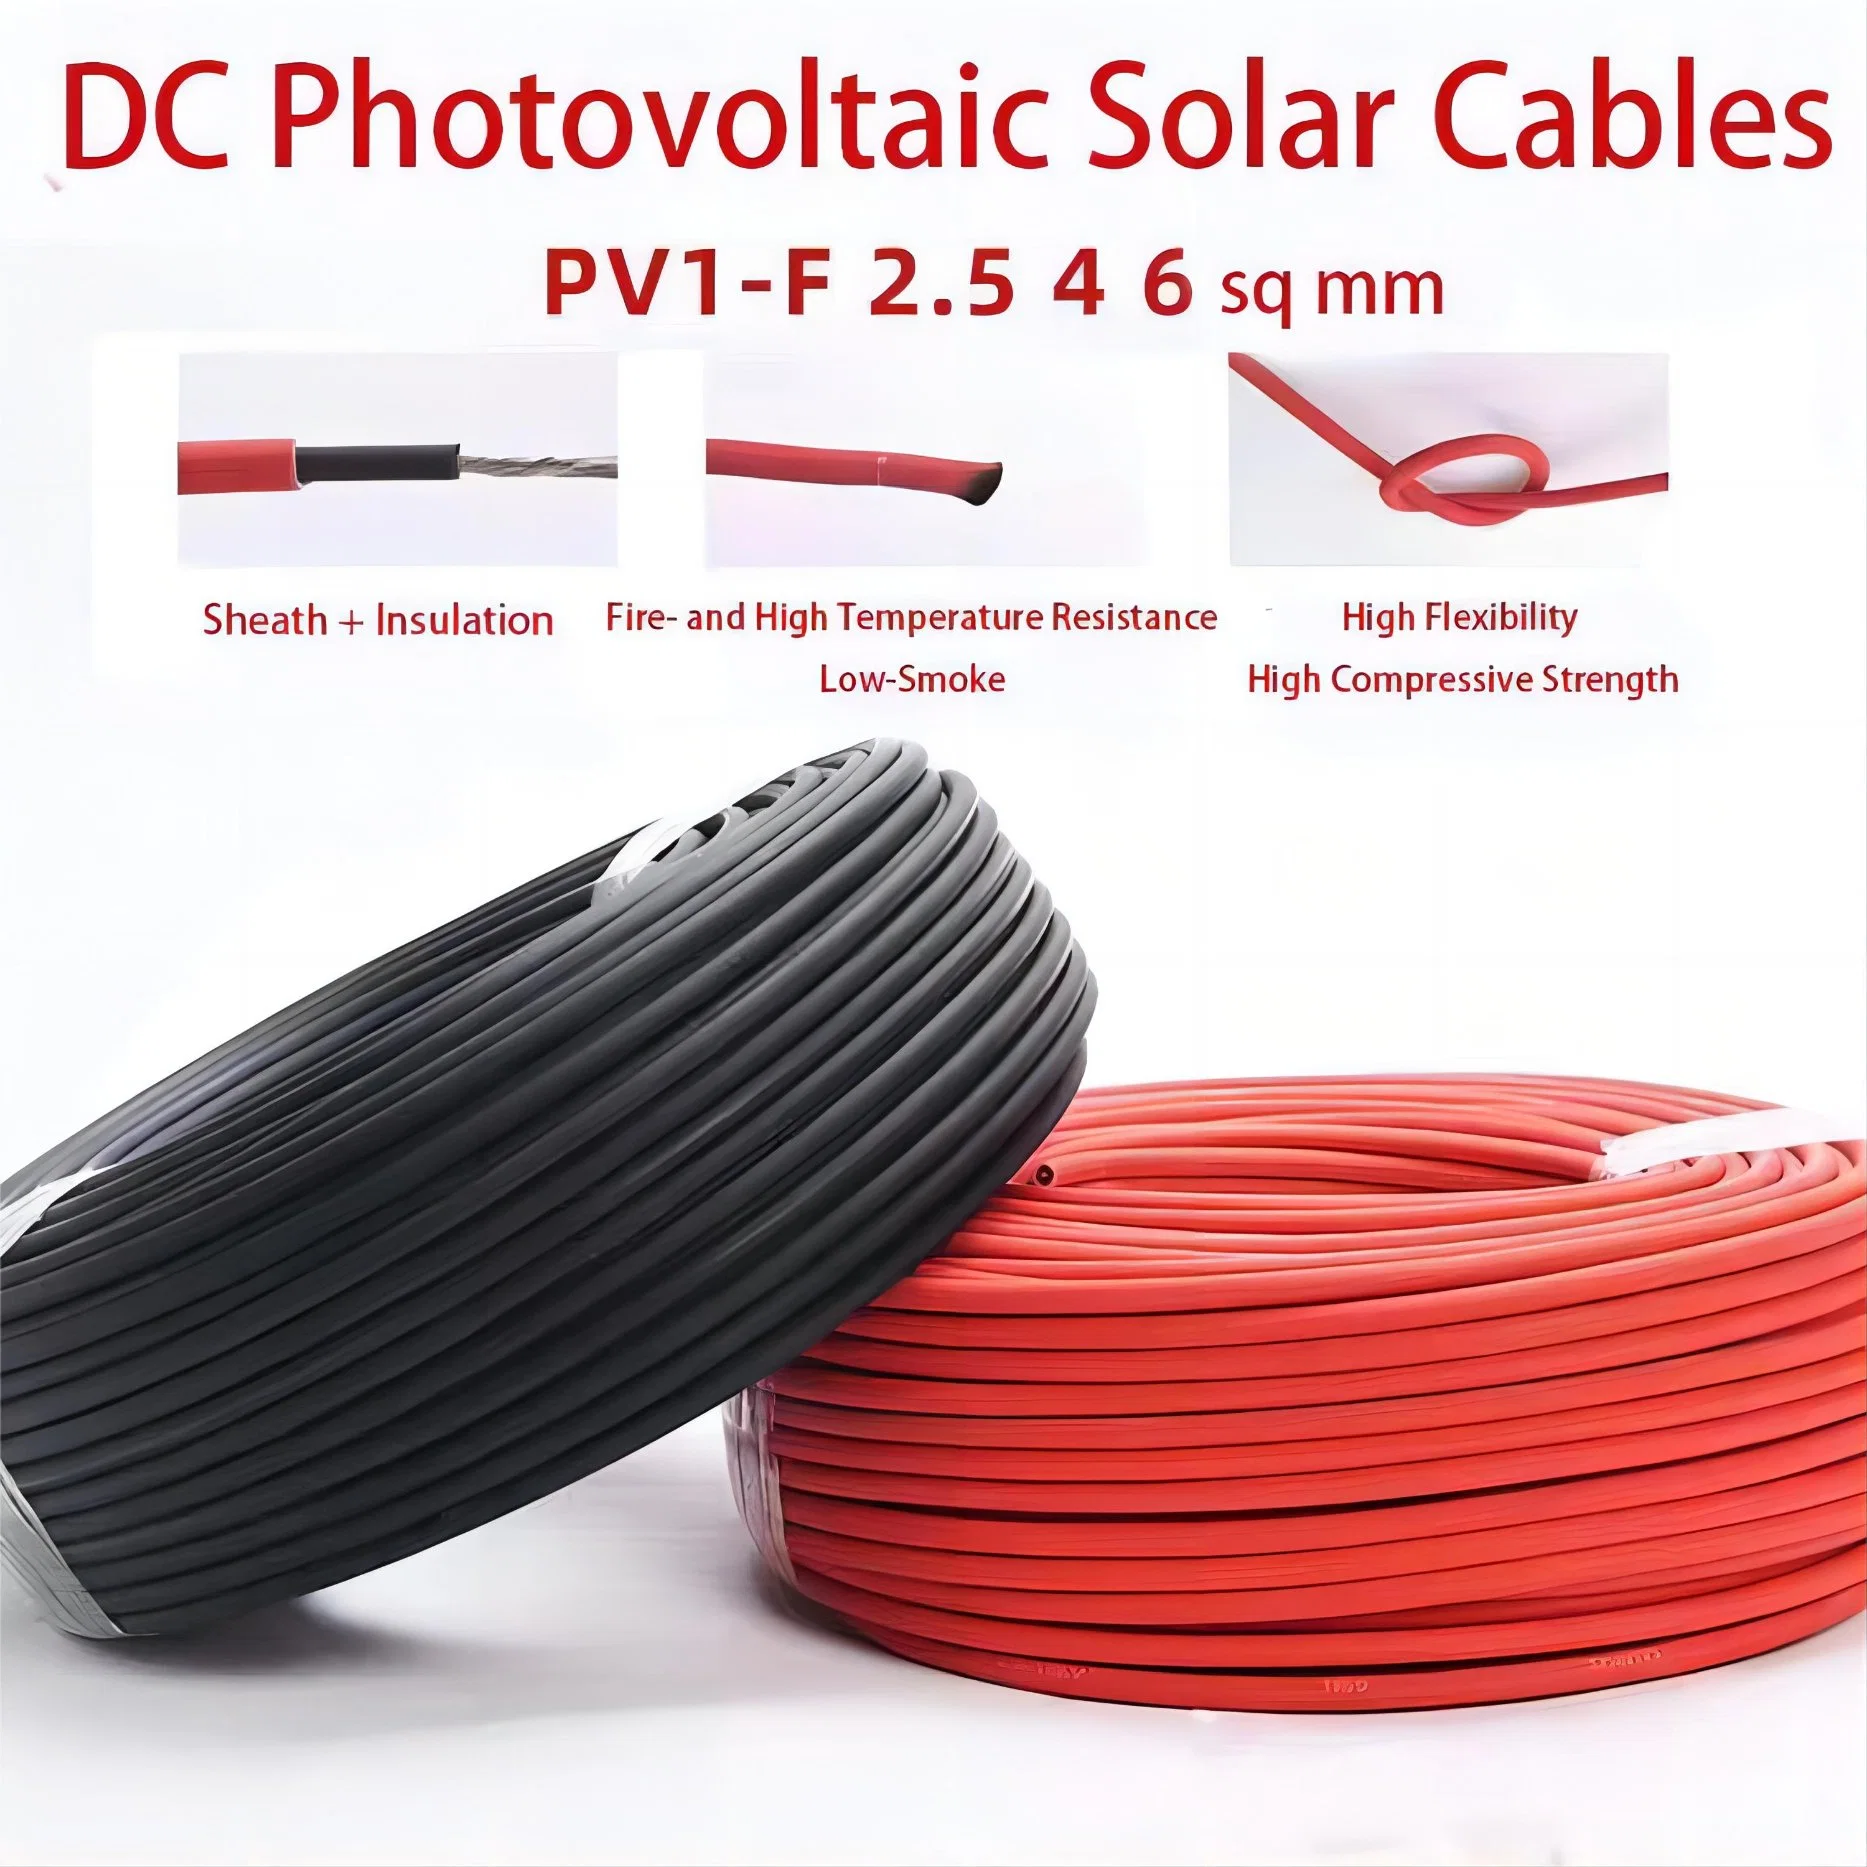 Solar Photovoltaic Cable PV1-F 4/6mm Flame Retardant Low Smoke and Fire-Resistant Halogen-Free Tinned Copper Wire